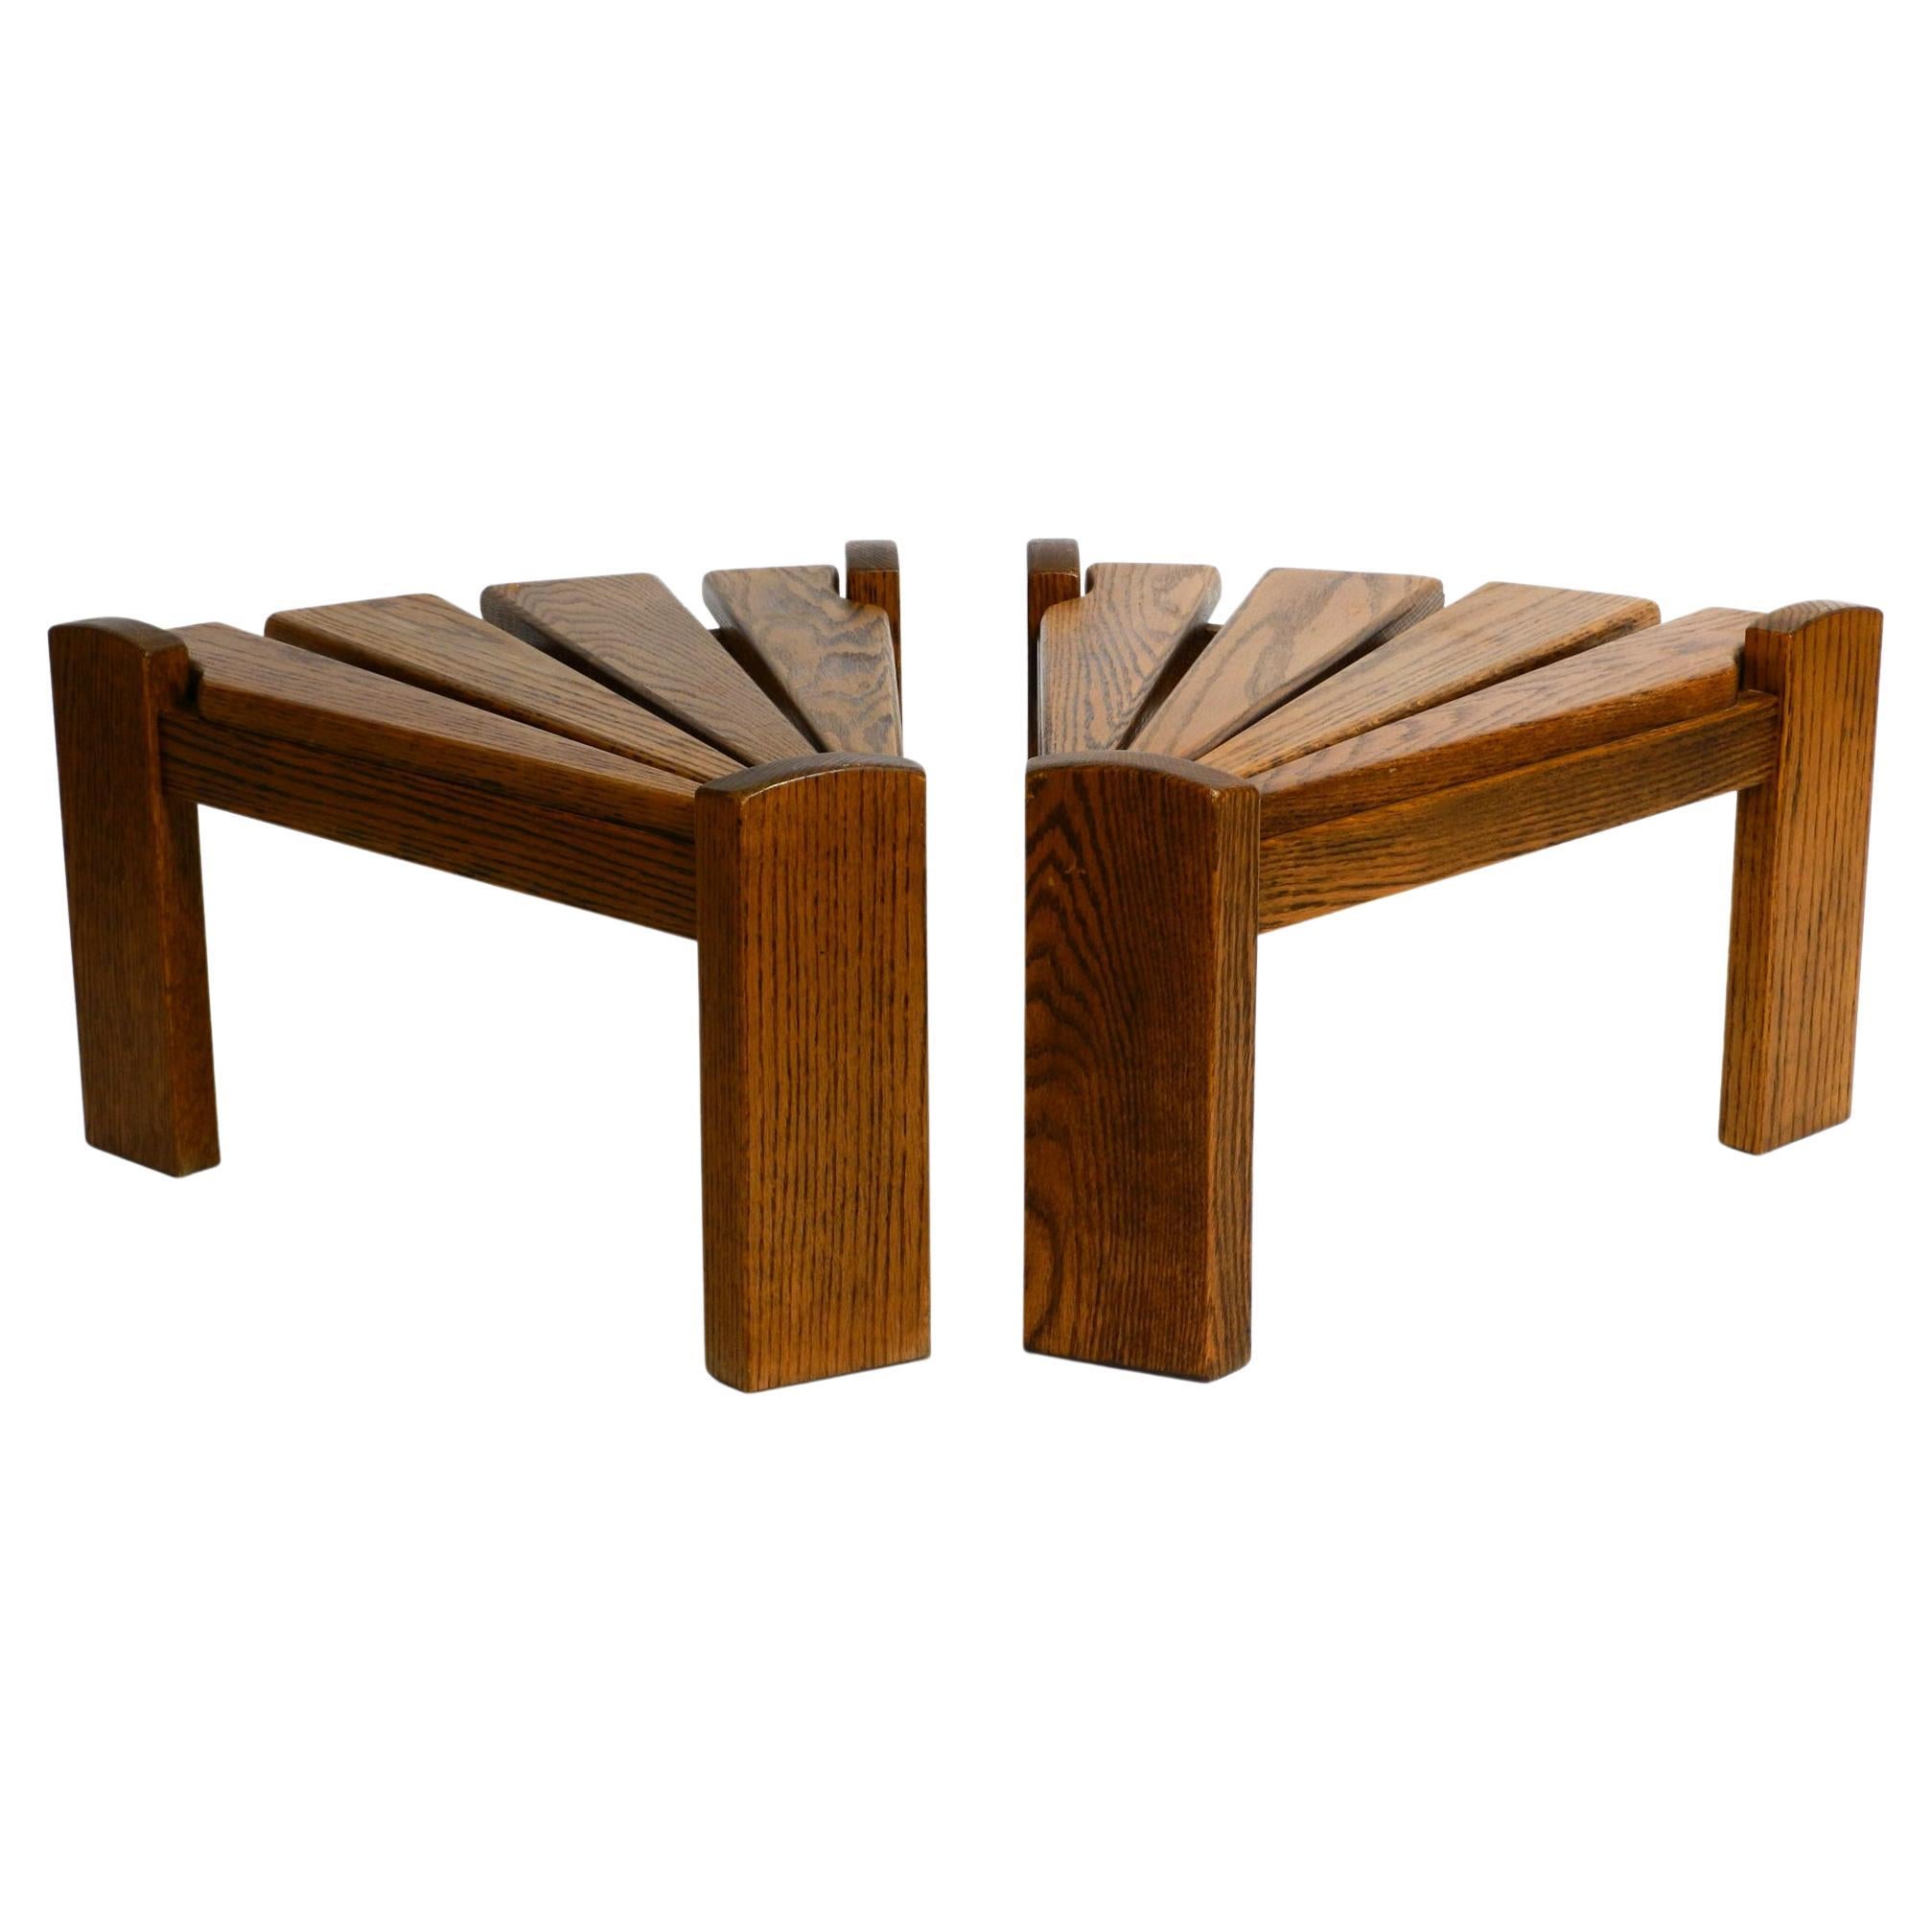 Two 50s Side or Coffee Tables in a Triangular Shape by Dittman for Awa Radbound